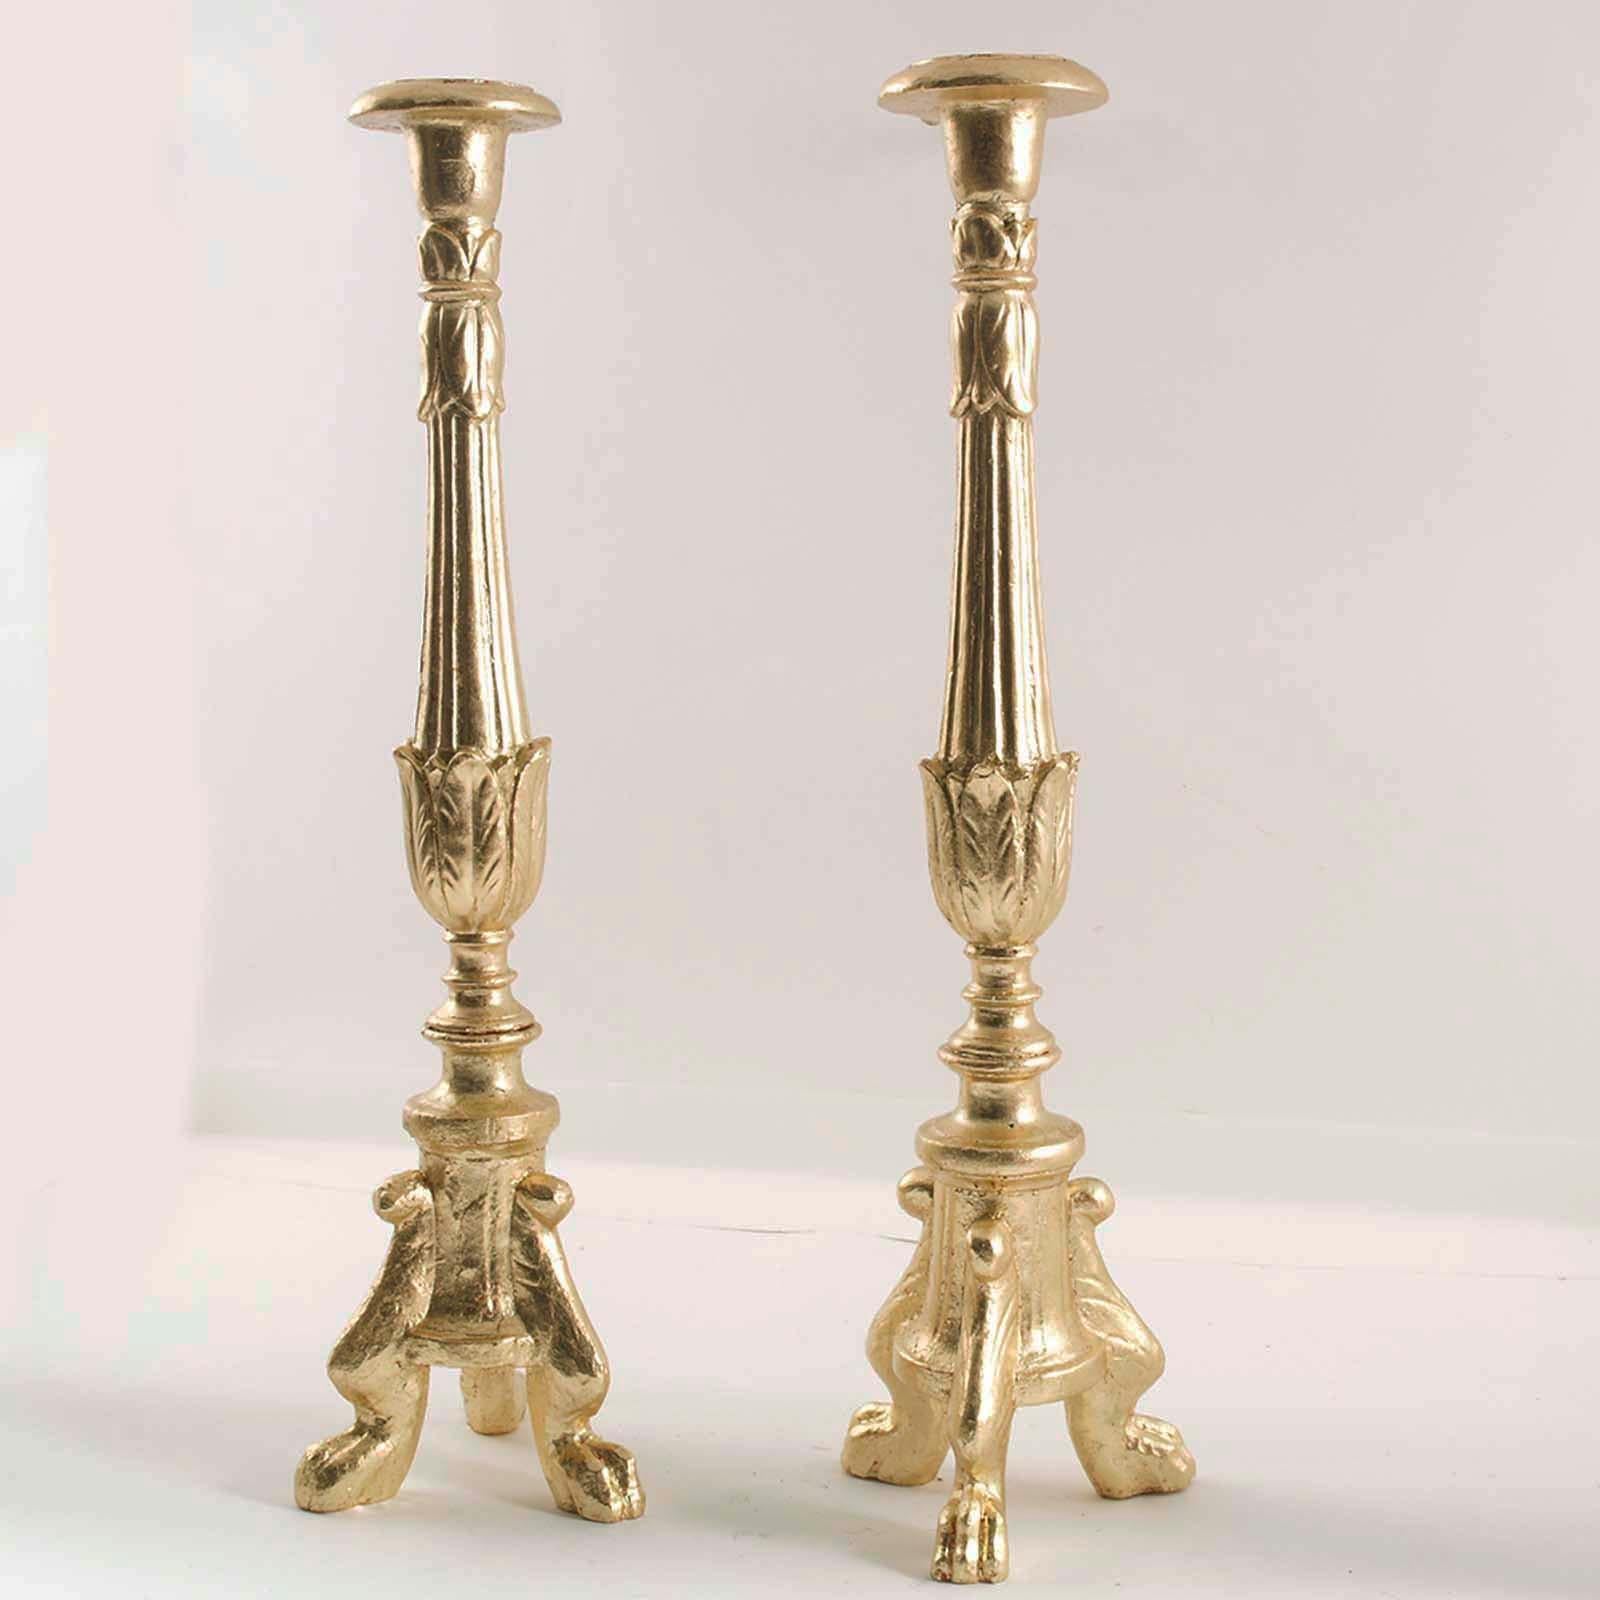 Italian precious original 17th century pair of decorative columns , Torchères, hand-carved walnut gold leaf covered, on a tripod base.